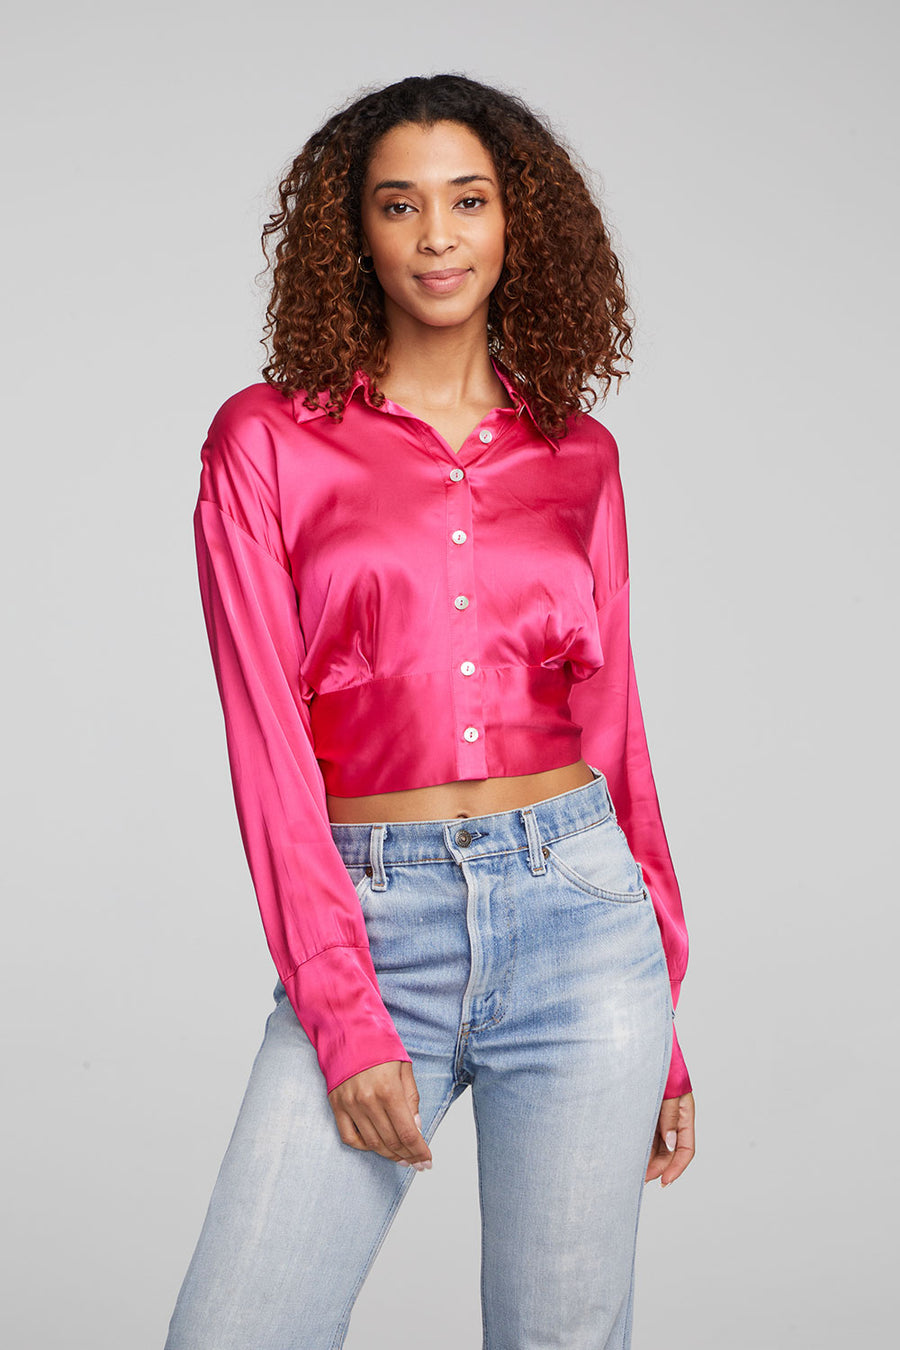 Agnes Cabaret Blouse WOMENS chaserbrand